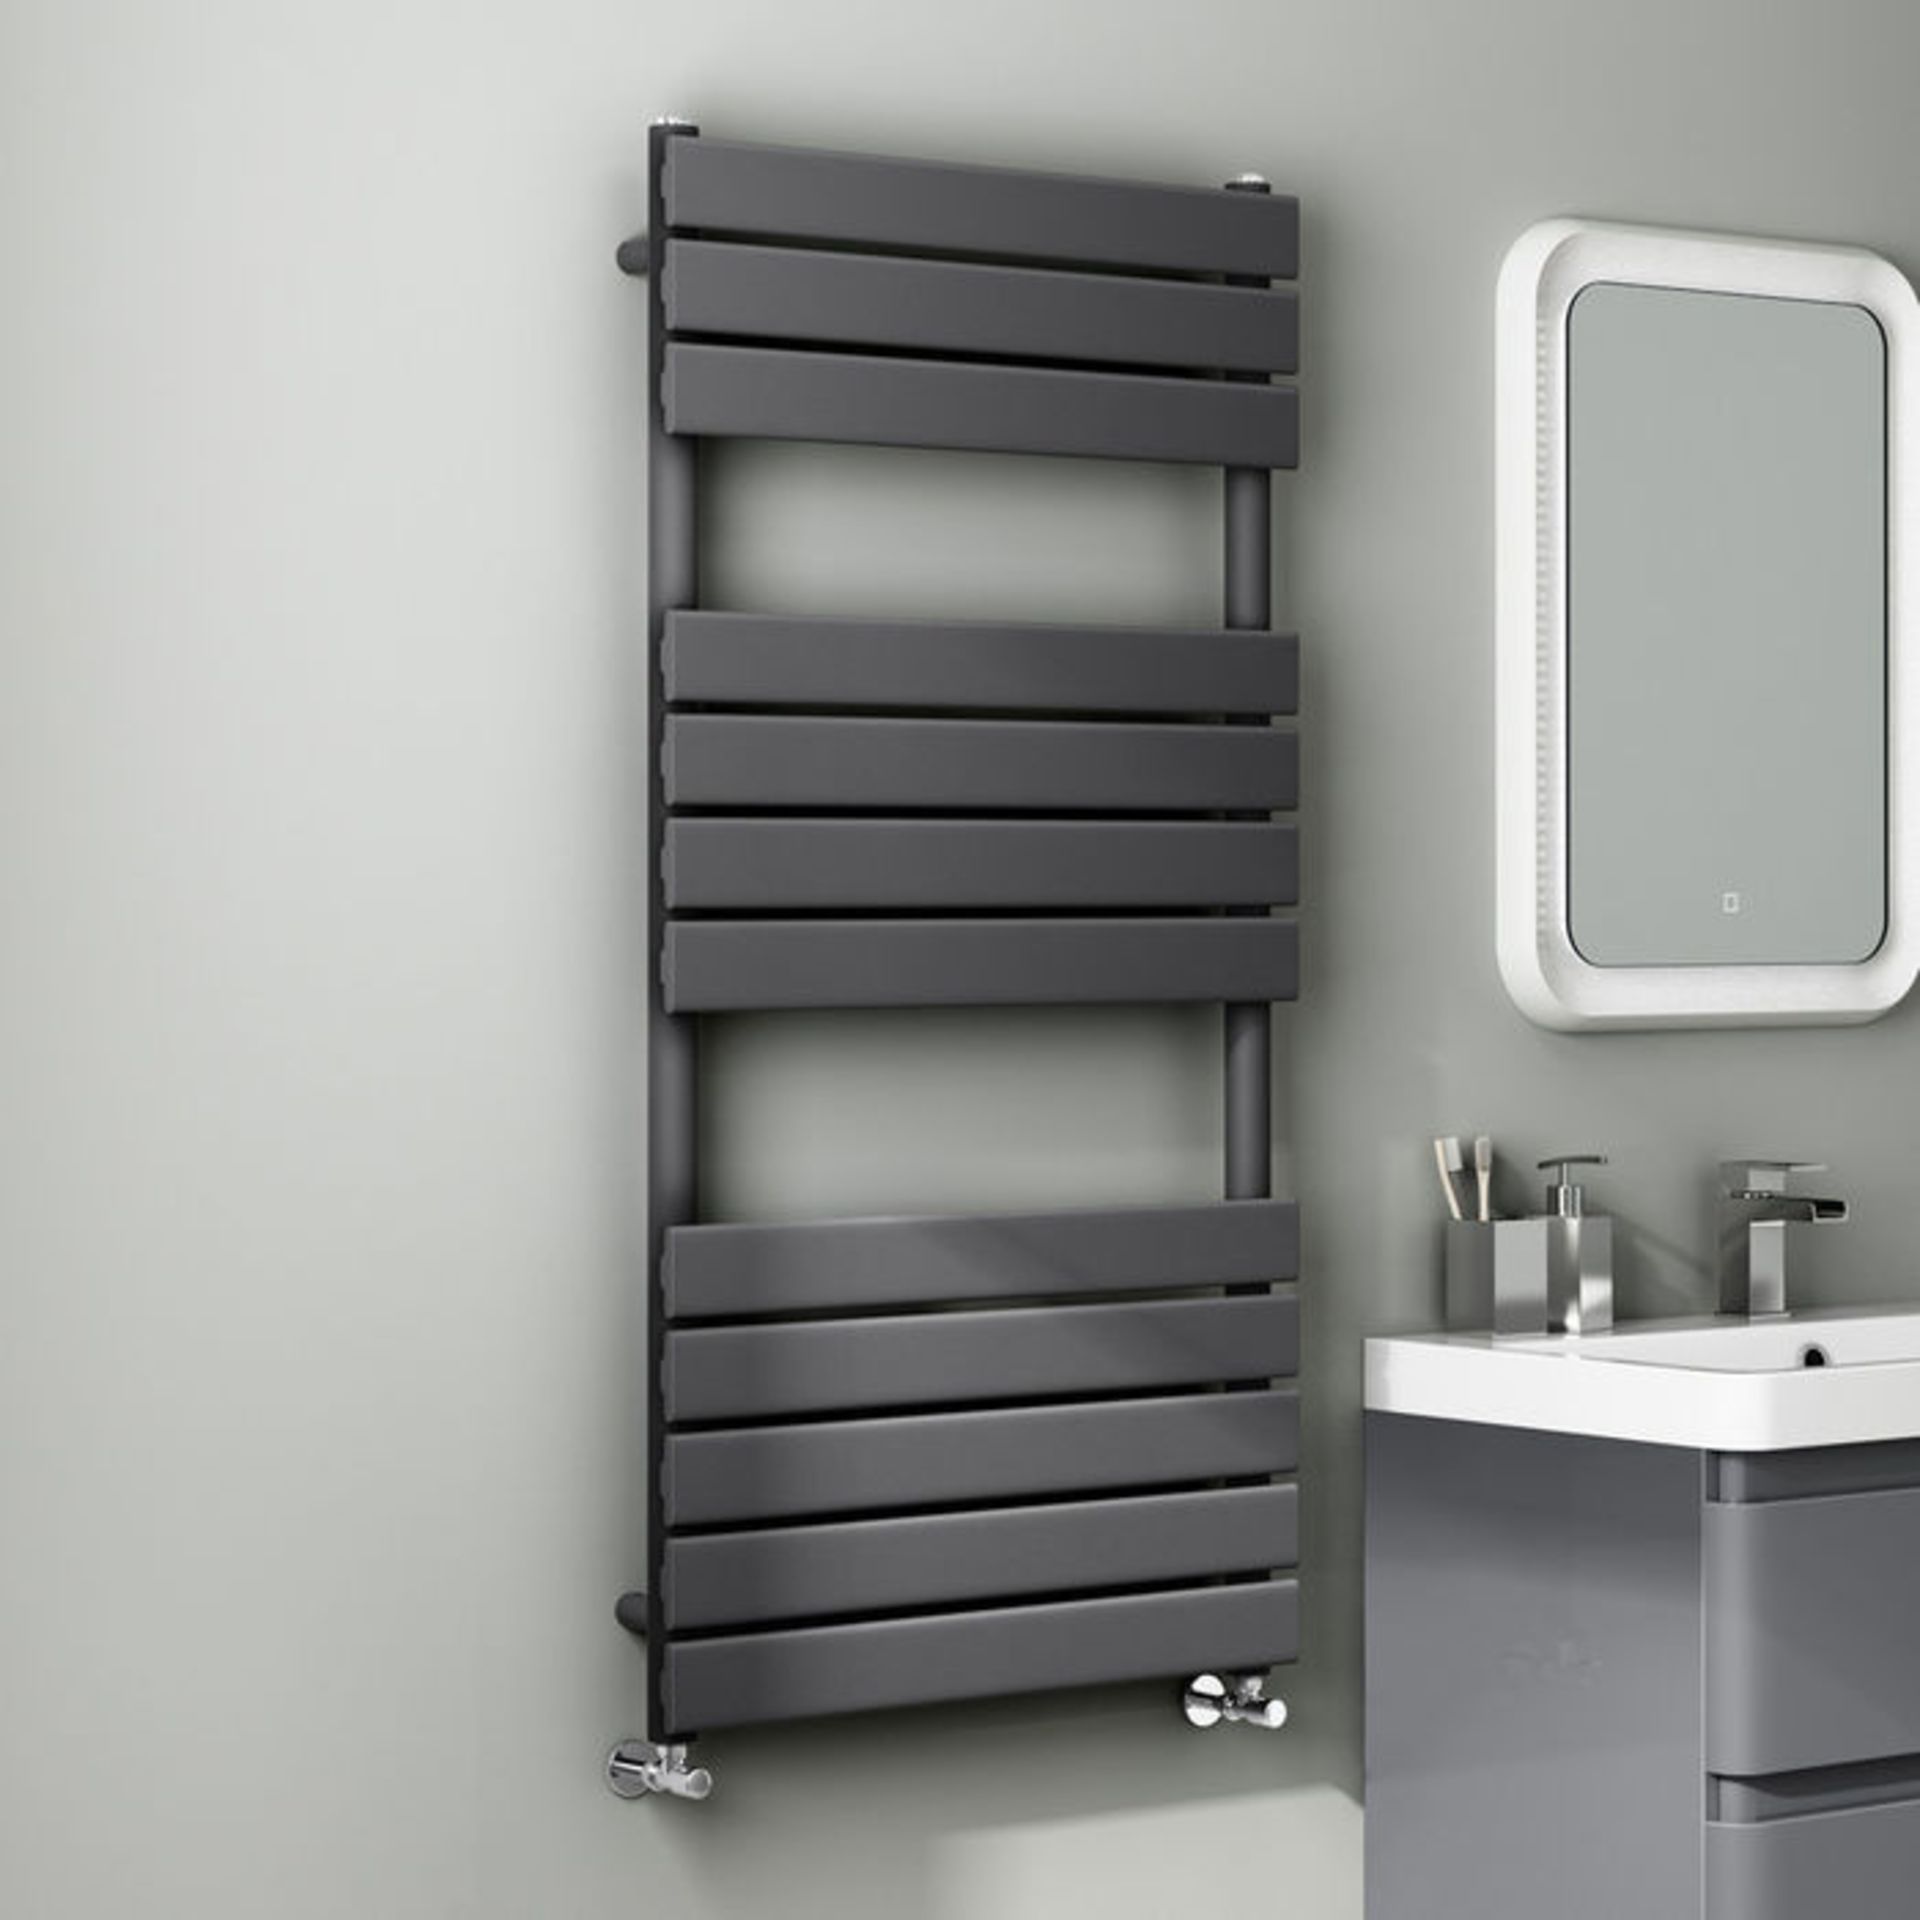 (AH46) 1200x600mm Anthracite Flat Panel Ladder Towel Radiator. RRP £374.99. Made with low carbon